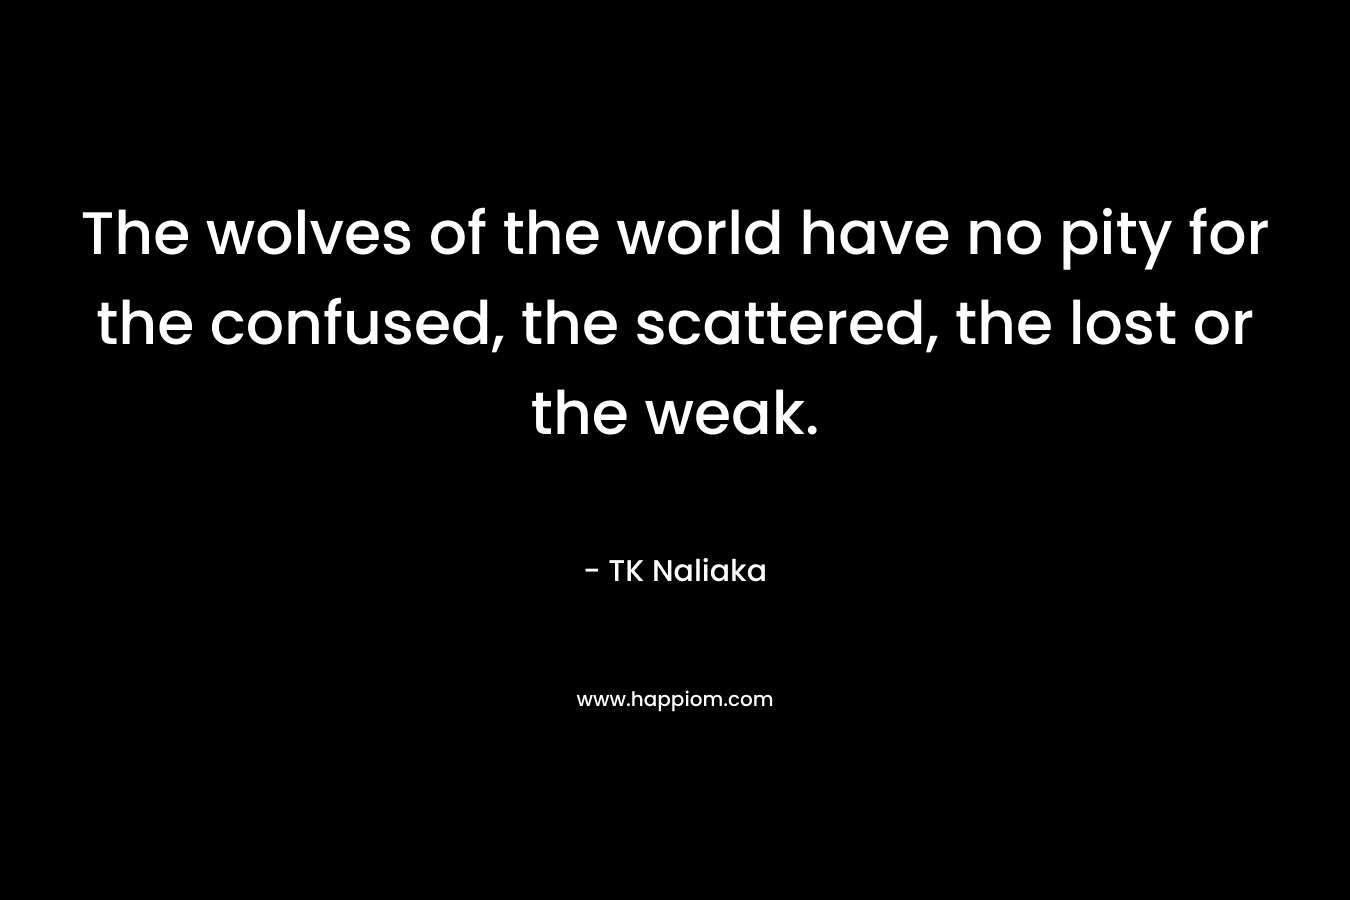 The wolves of the world have no pity for the confused, the scattered, the lost or the weak.